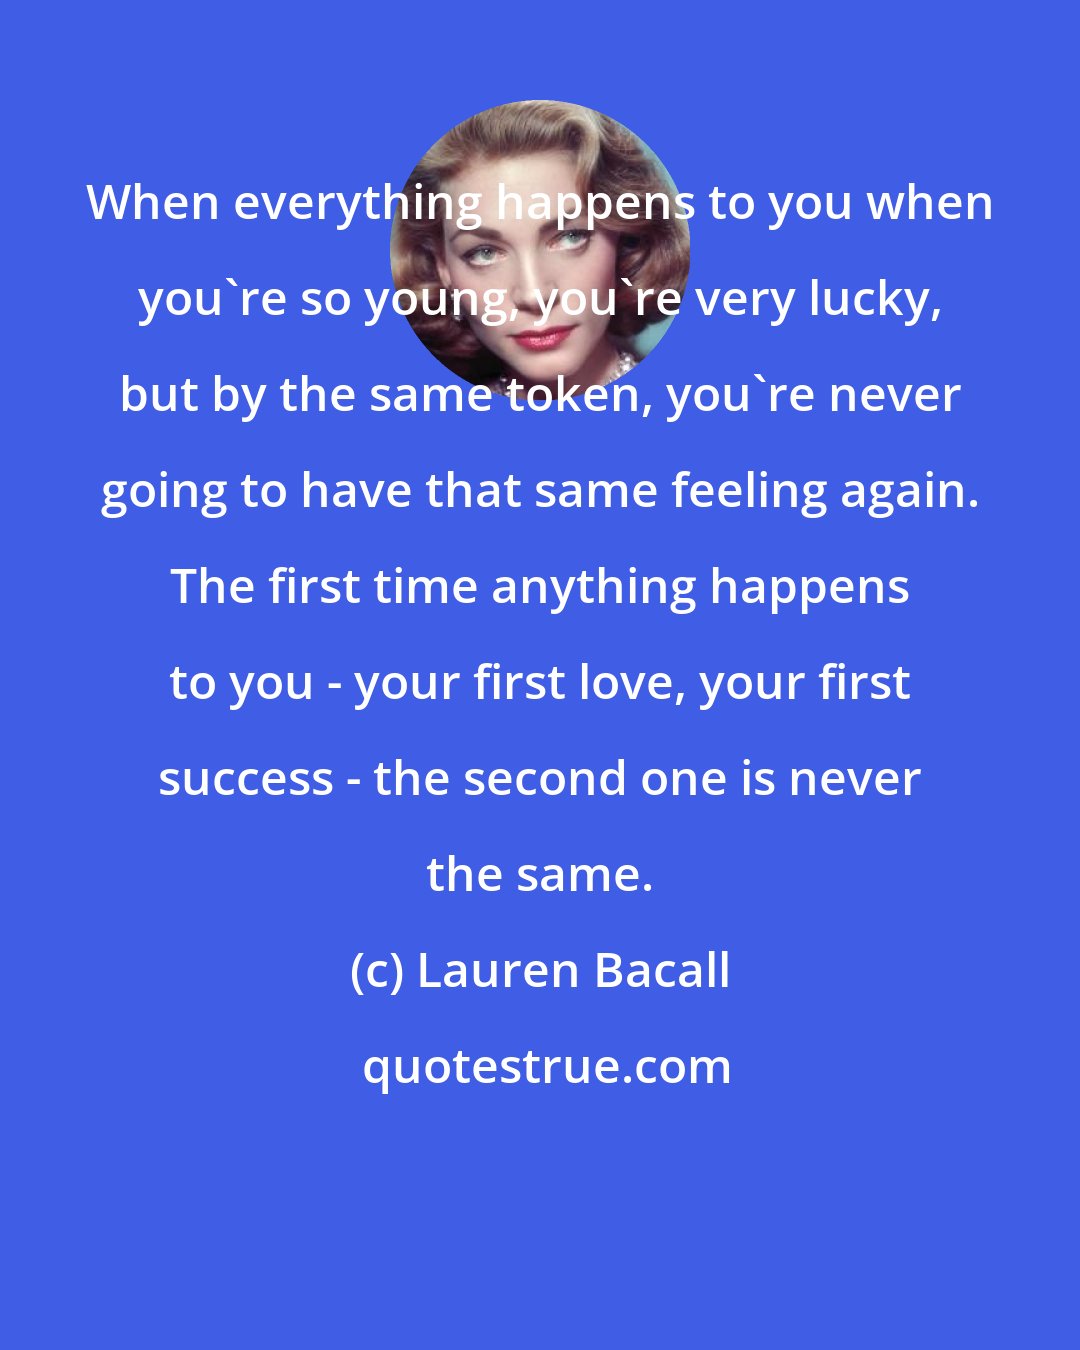 Lauren Bacall: When everything happens to you when you're so young, you're very lucky, but by the same token, you're never going to have that same feeling again. The first time anything happens to you - your first love, your first success - the second one is never the same.